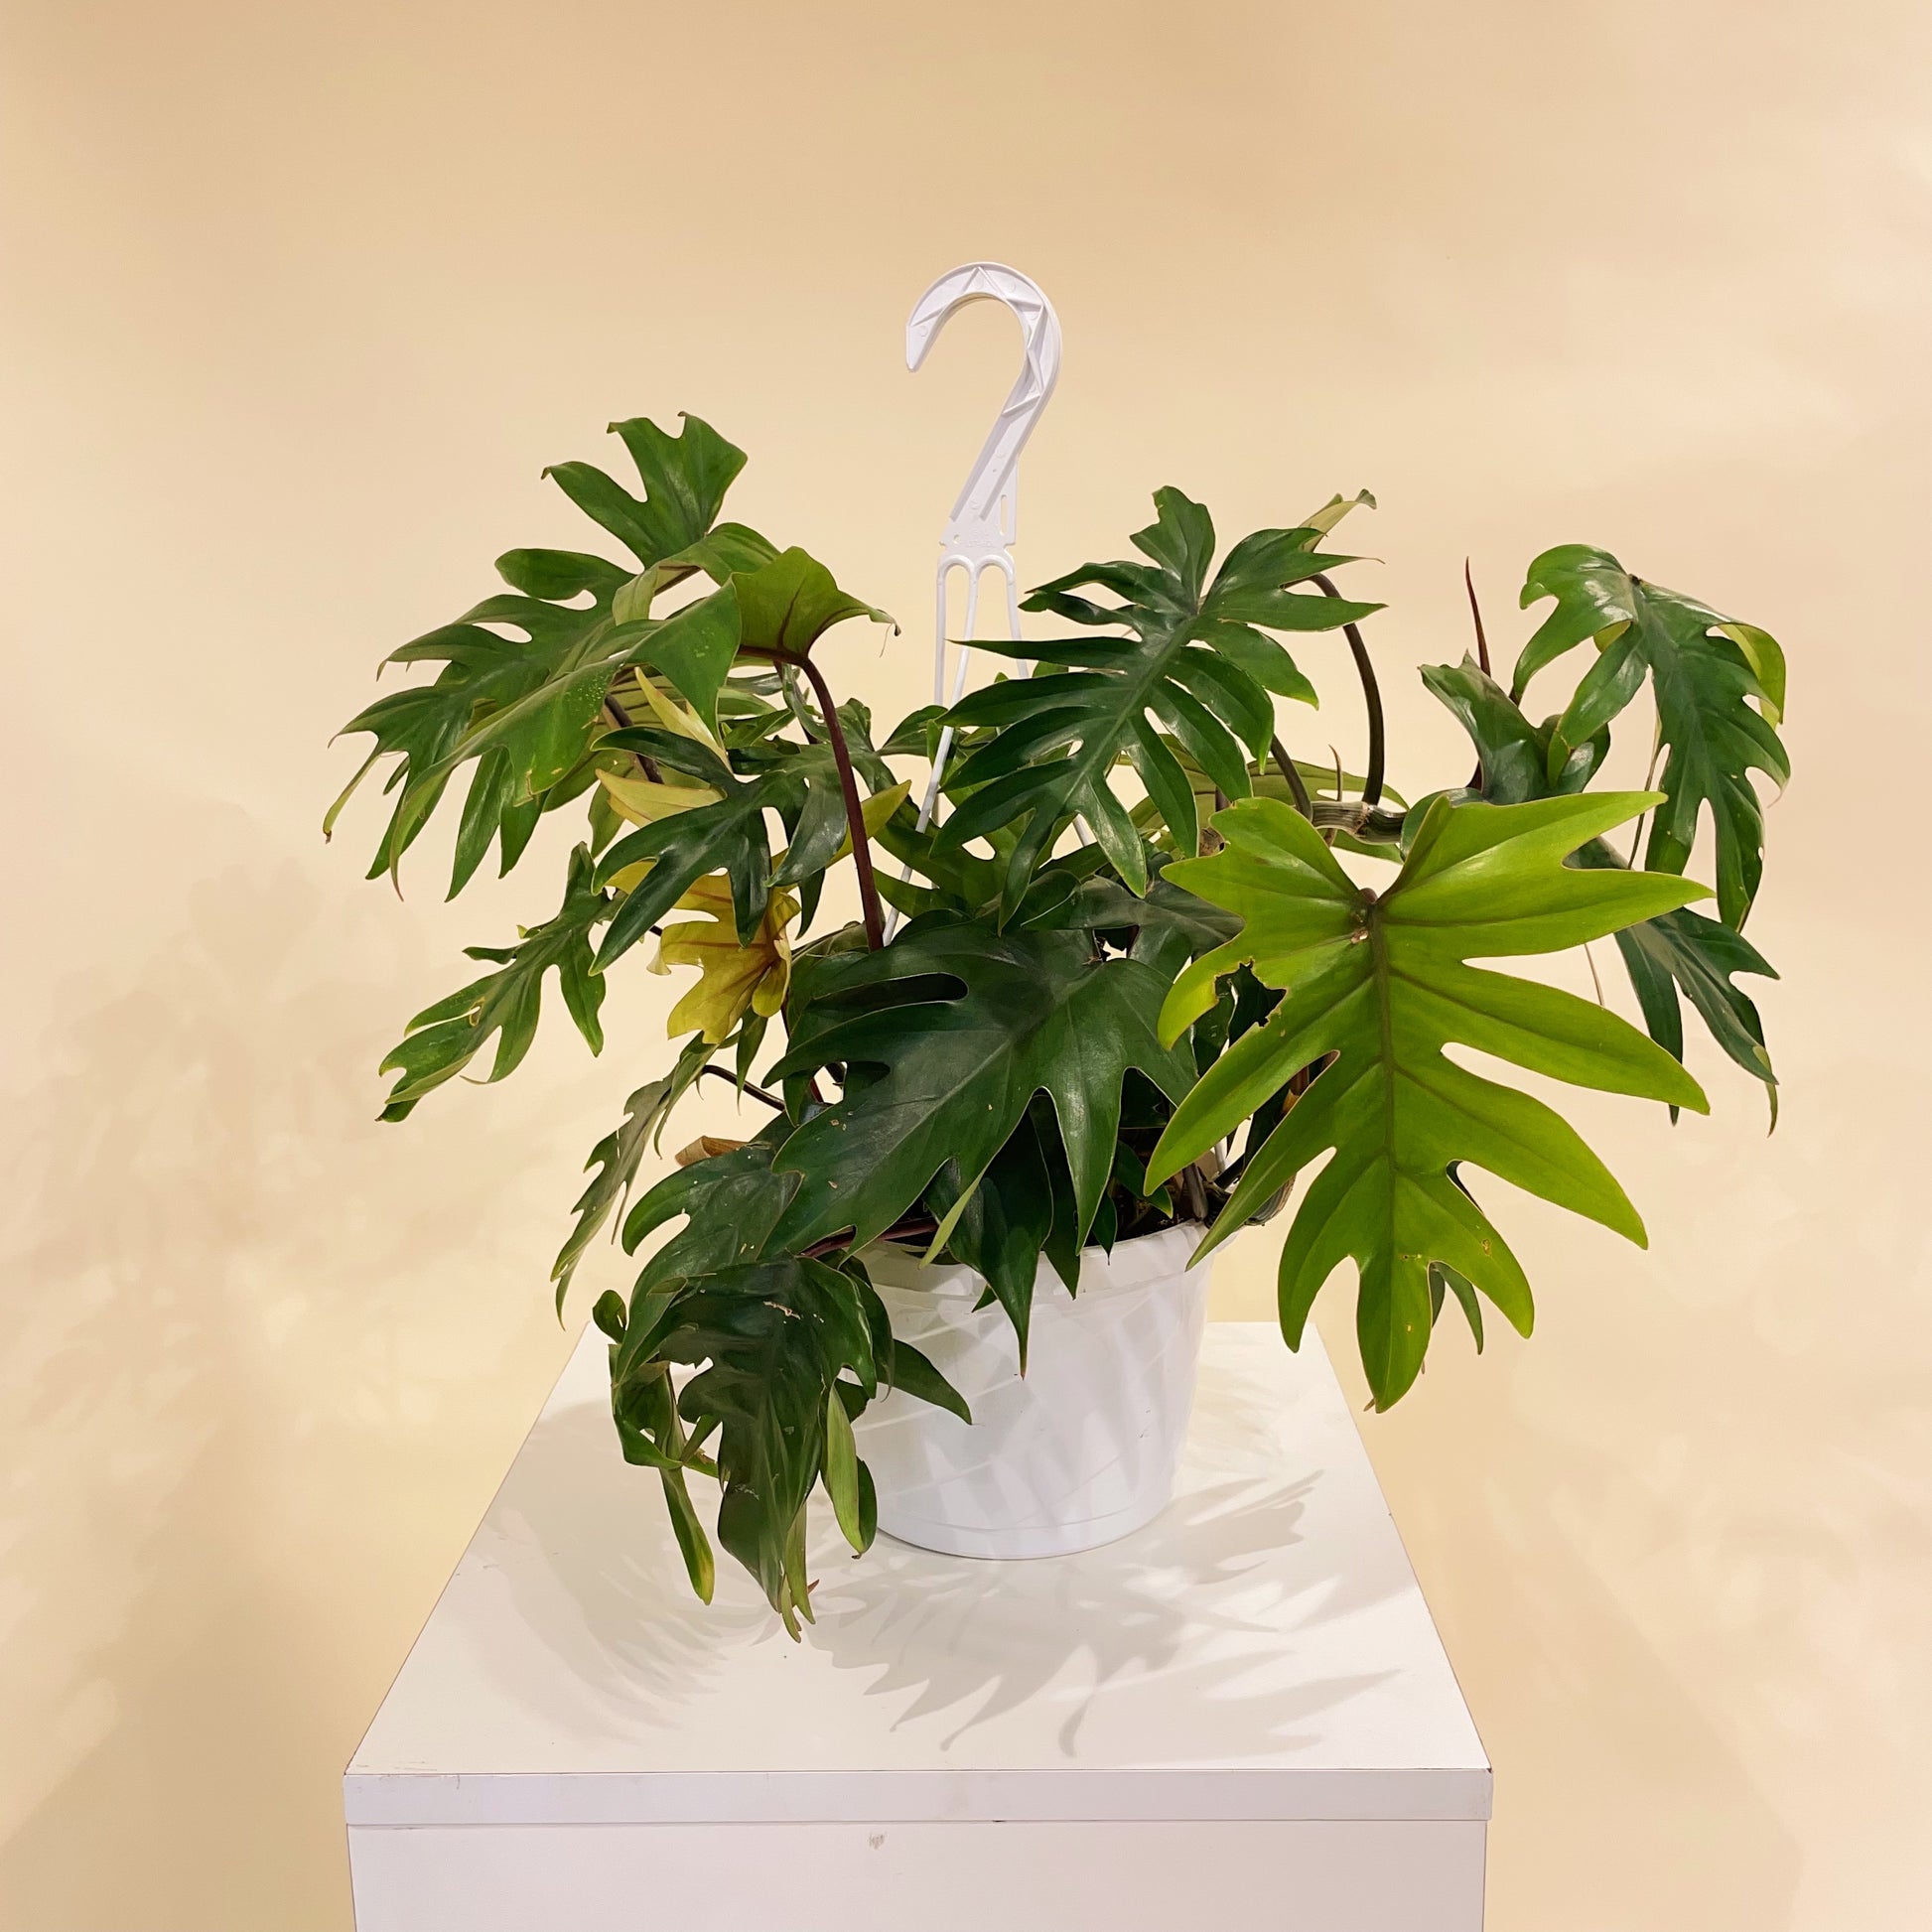 Tahiti Philo (Philodendron) in a 8 inch pot. Indoor plant for sale by Promise Supply for delivery and pickup in Toronto